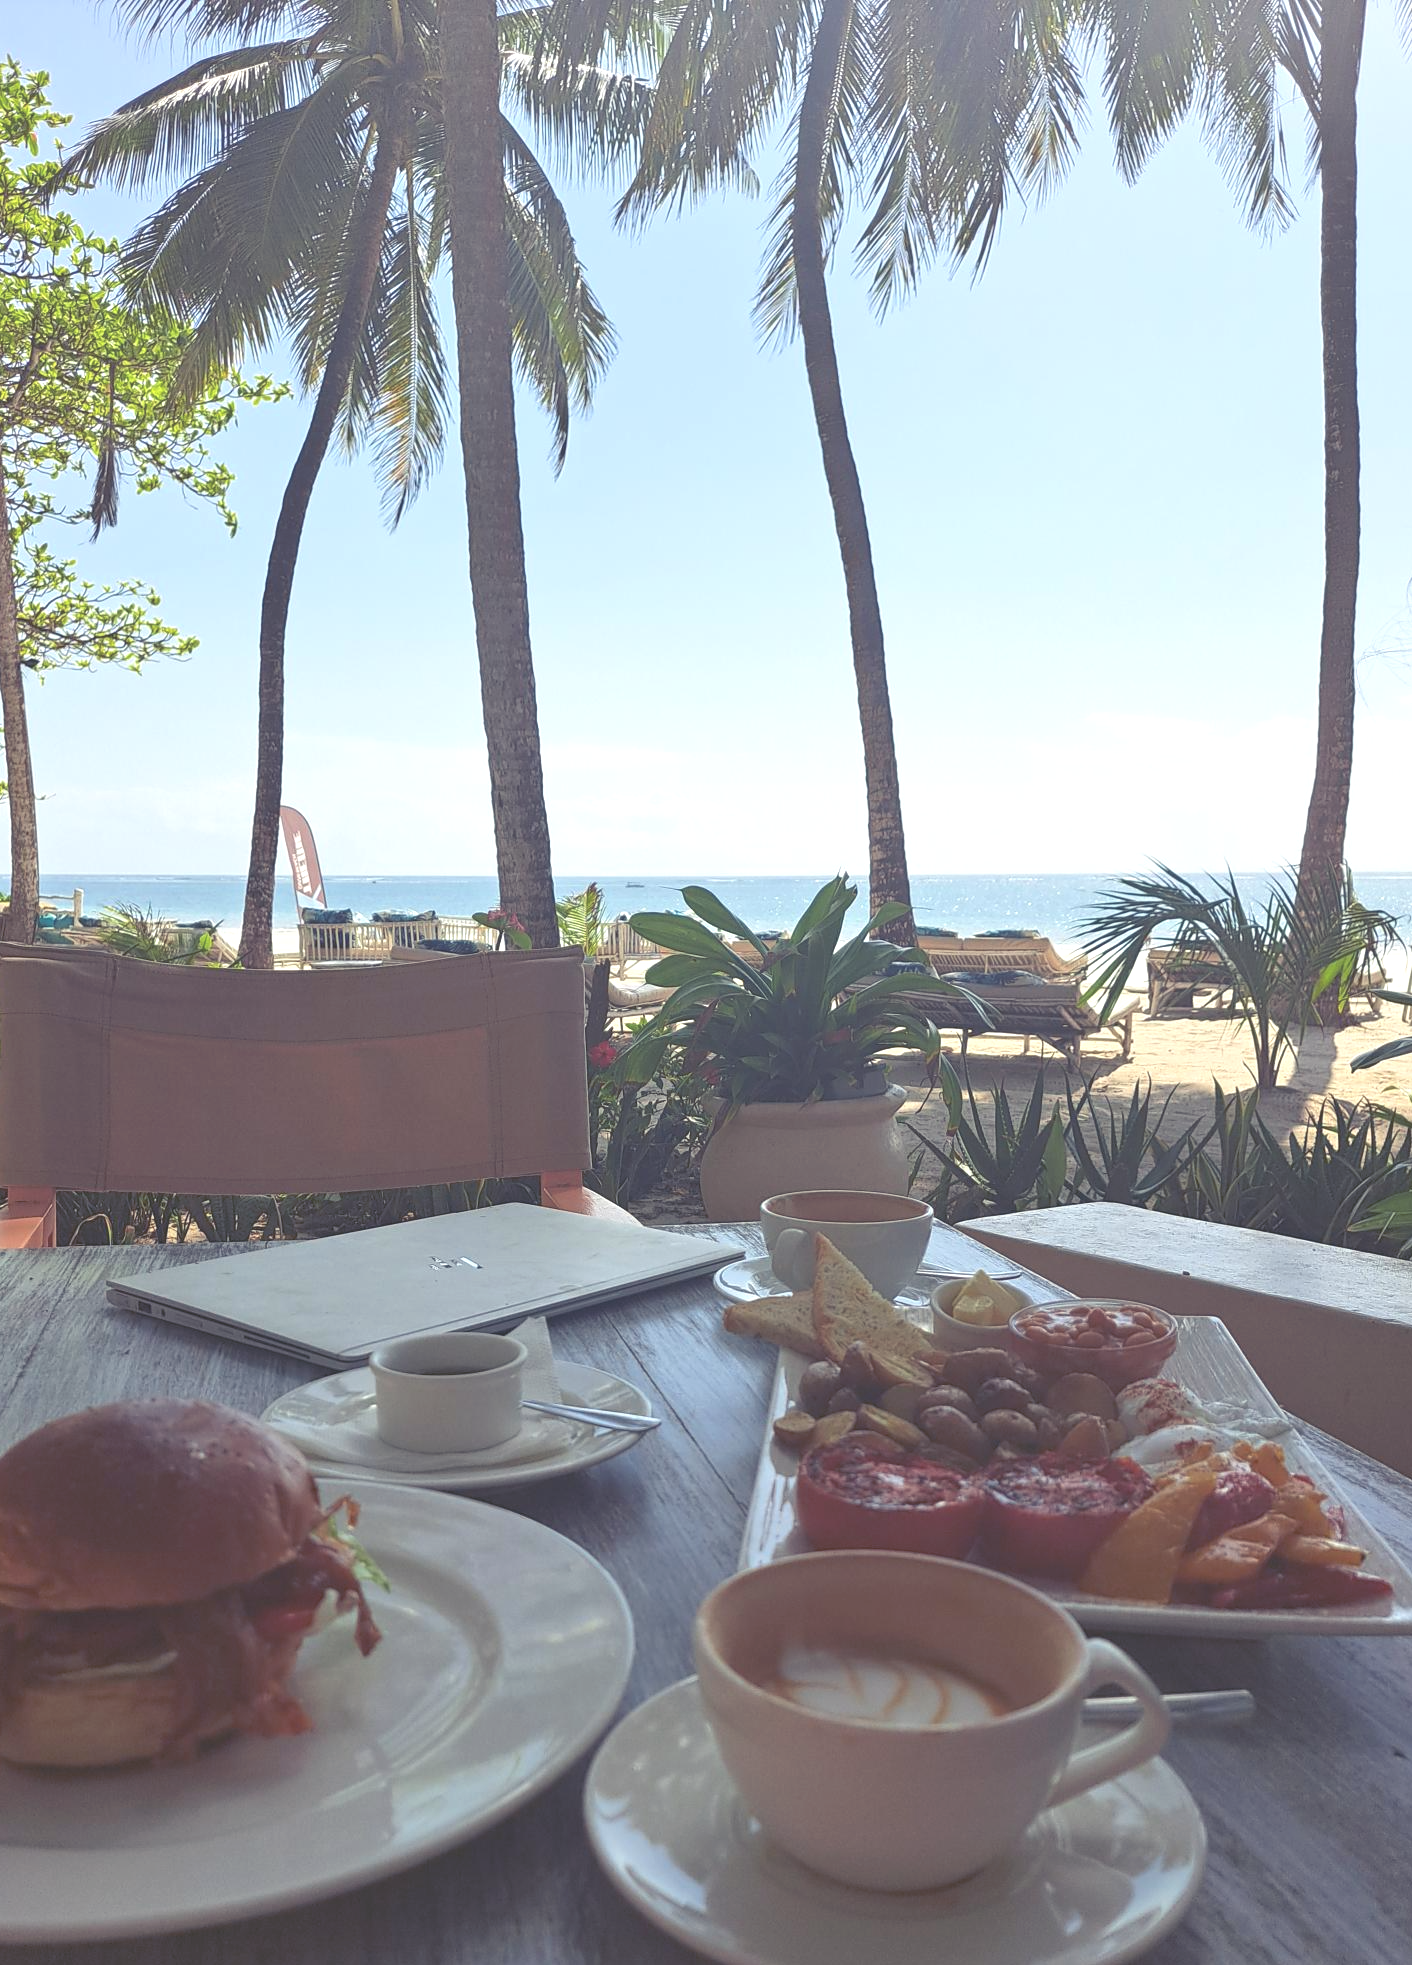 Heartful breakfast in one of the best cafes where to work from in Diani as a Digital Nomad